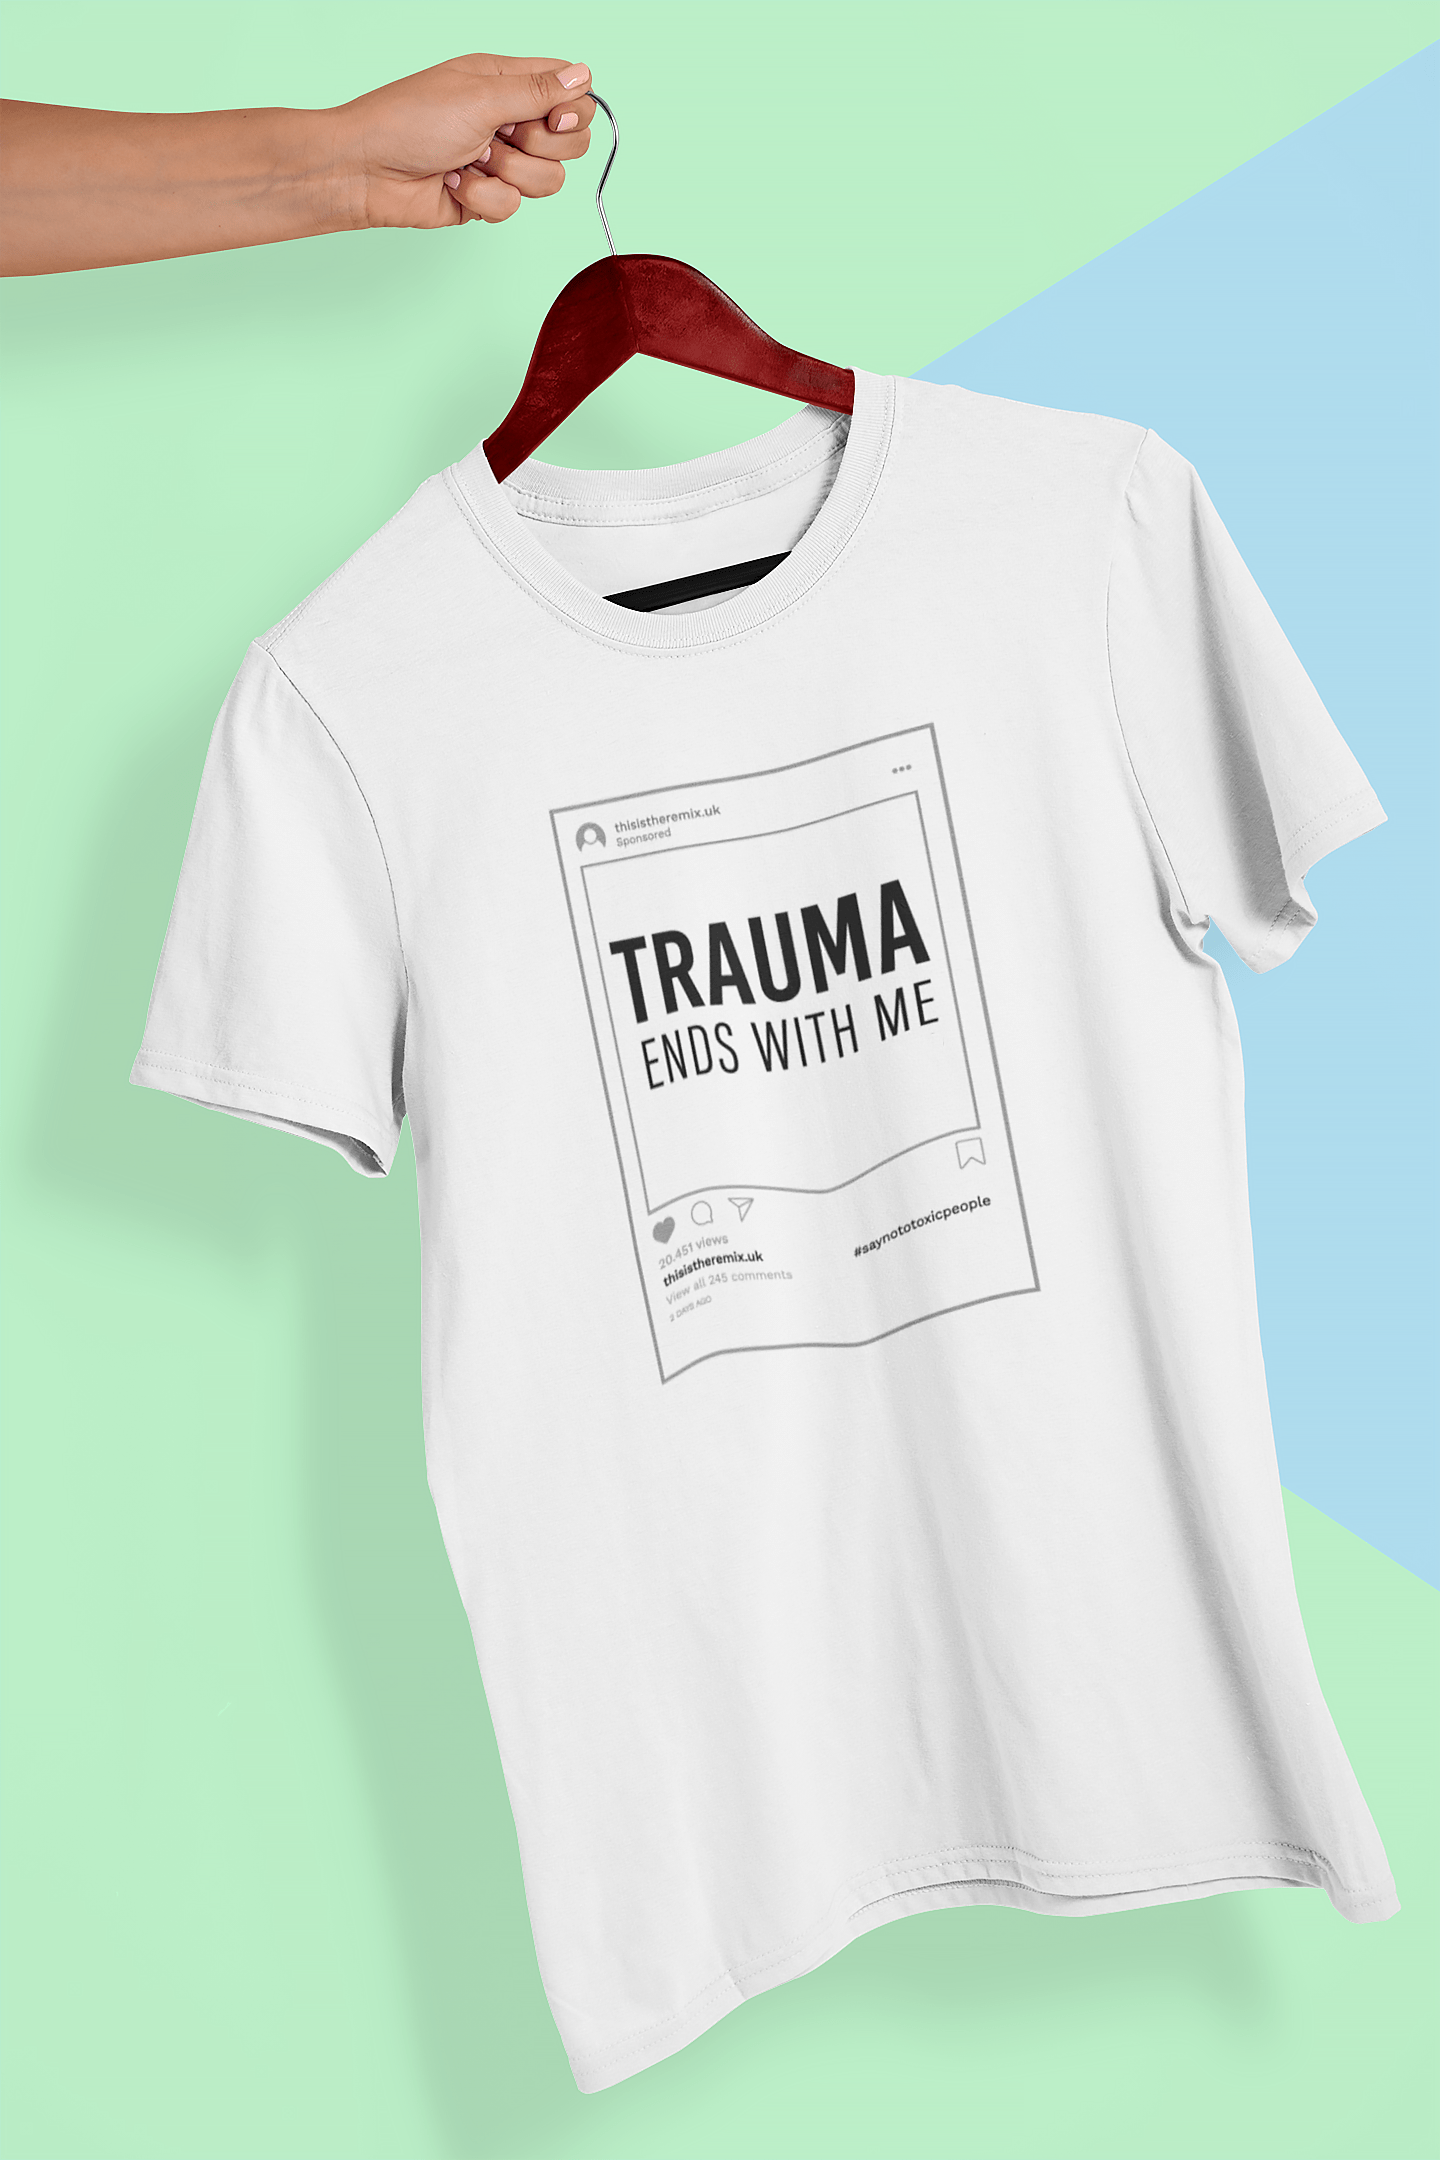 This is The Remix T-shirt TRAUMA ENDS WITH ME - Unisex T-Shirt